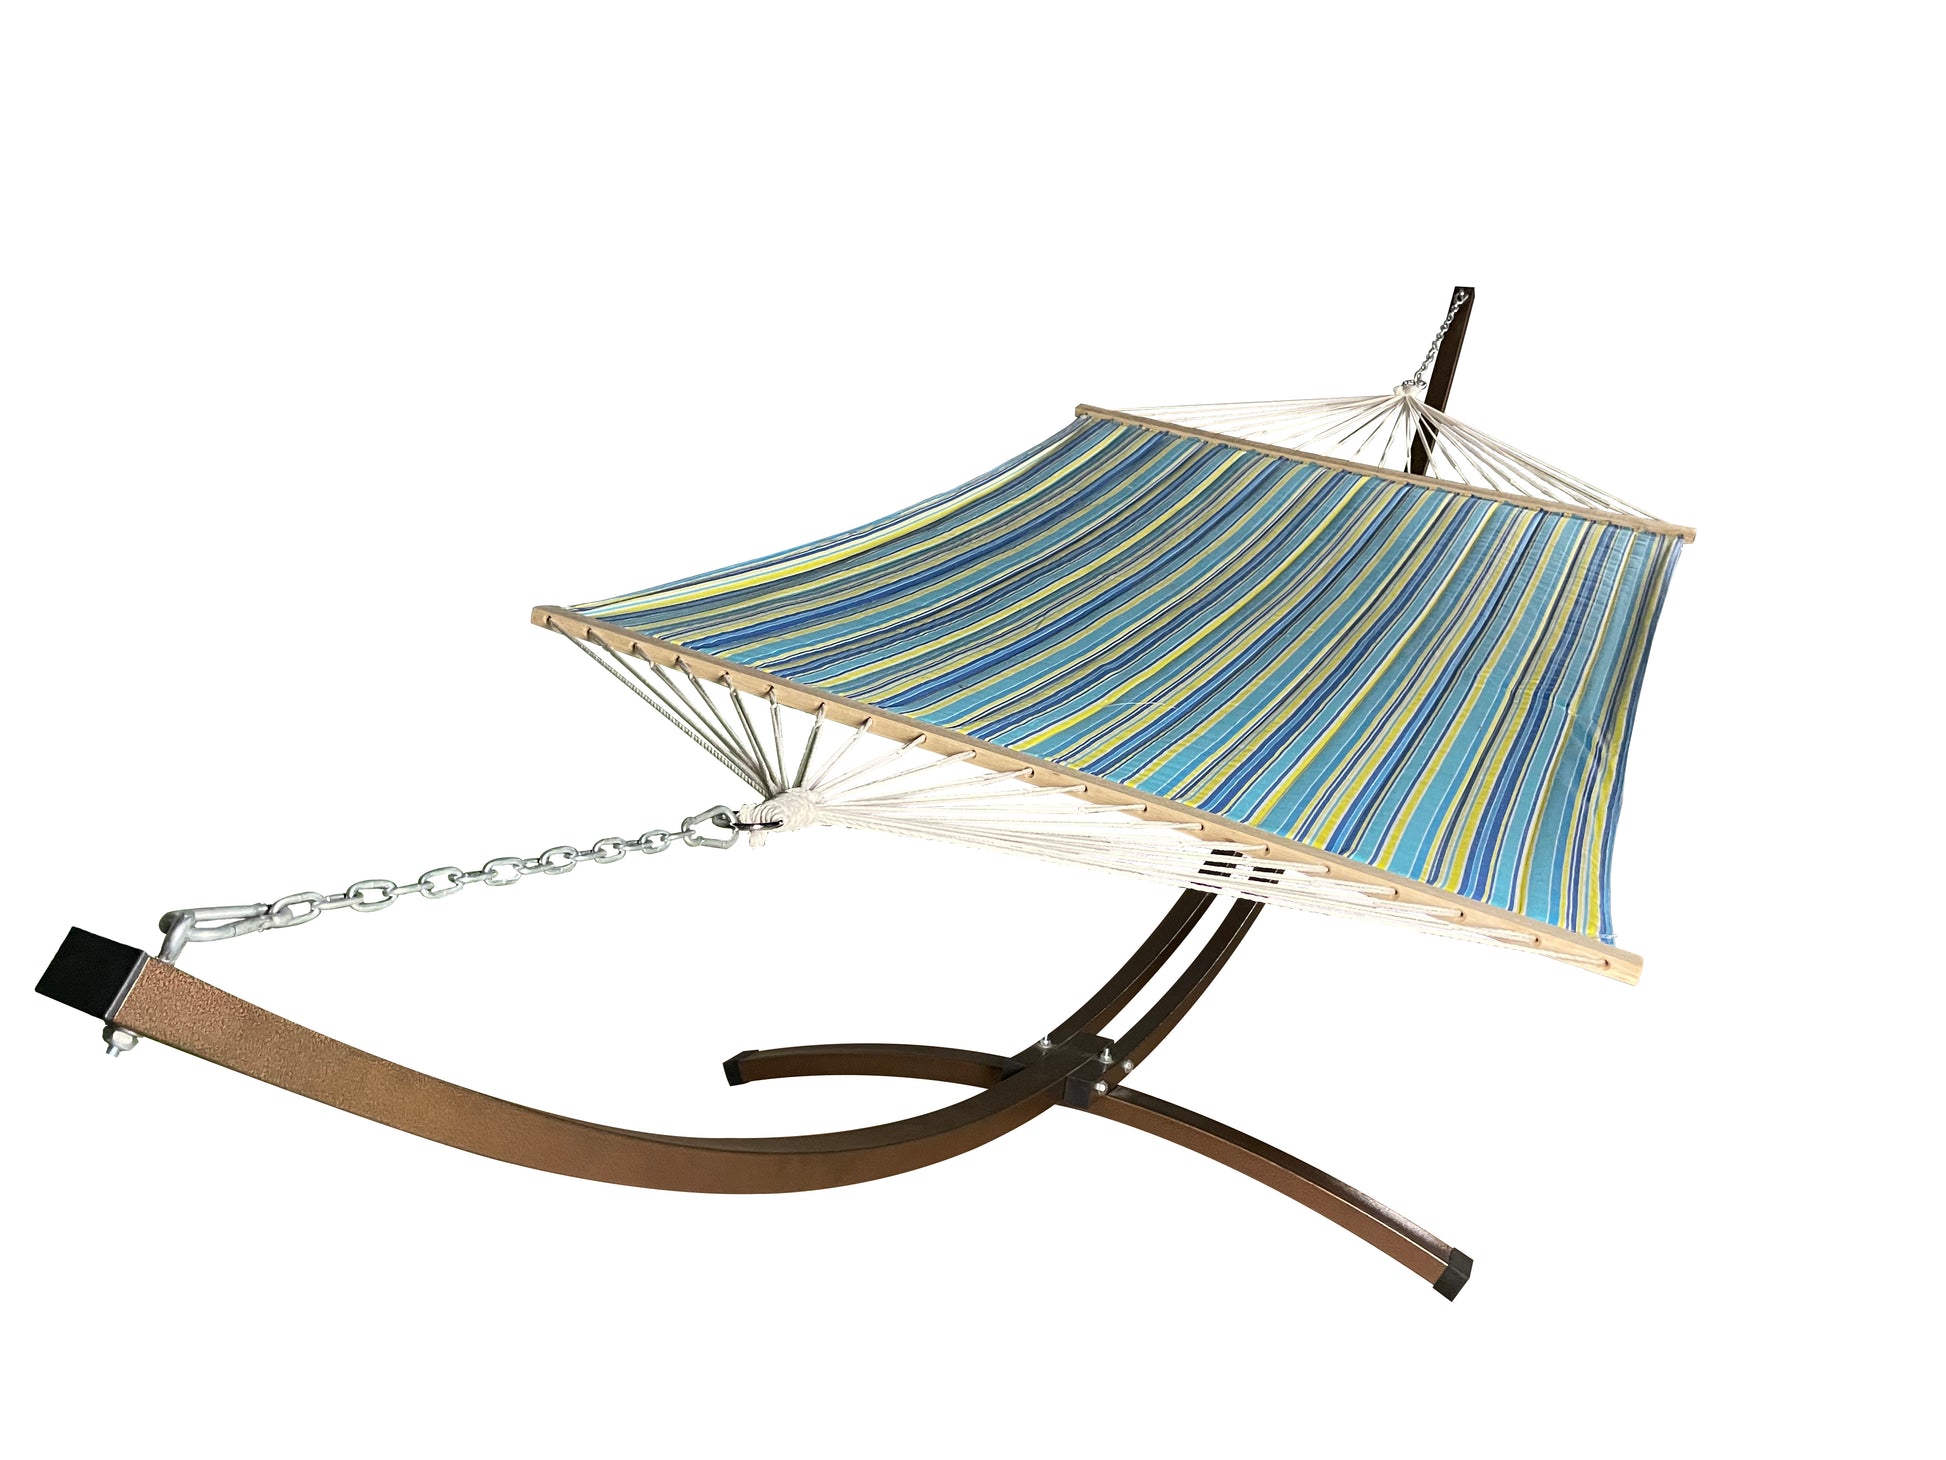 Petra Leisure Bronze Stand w/Teal/Yellow Hammock Bed.